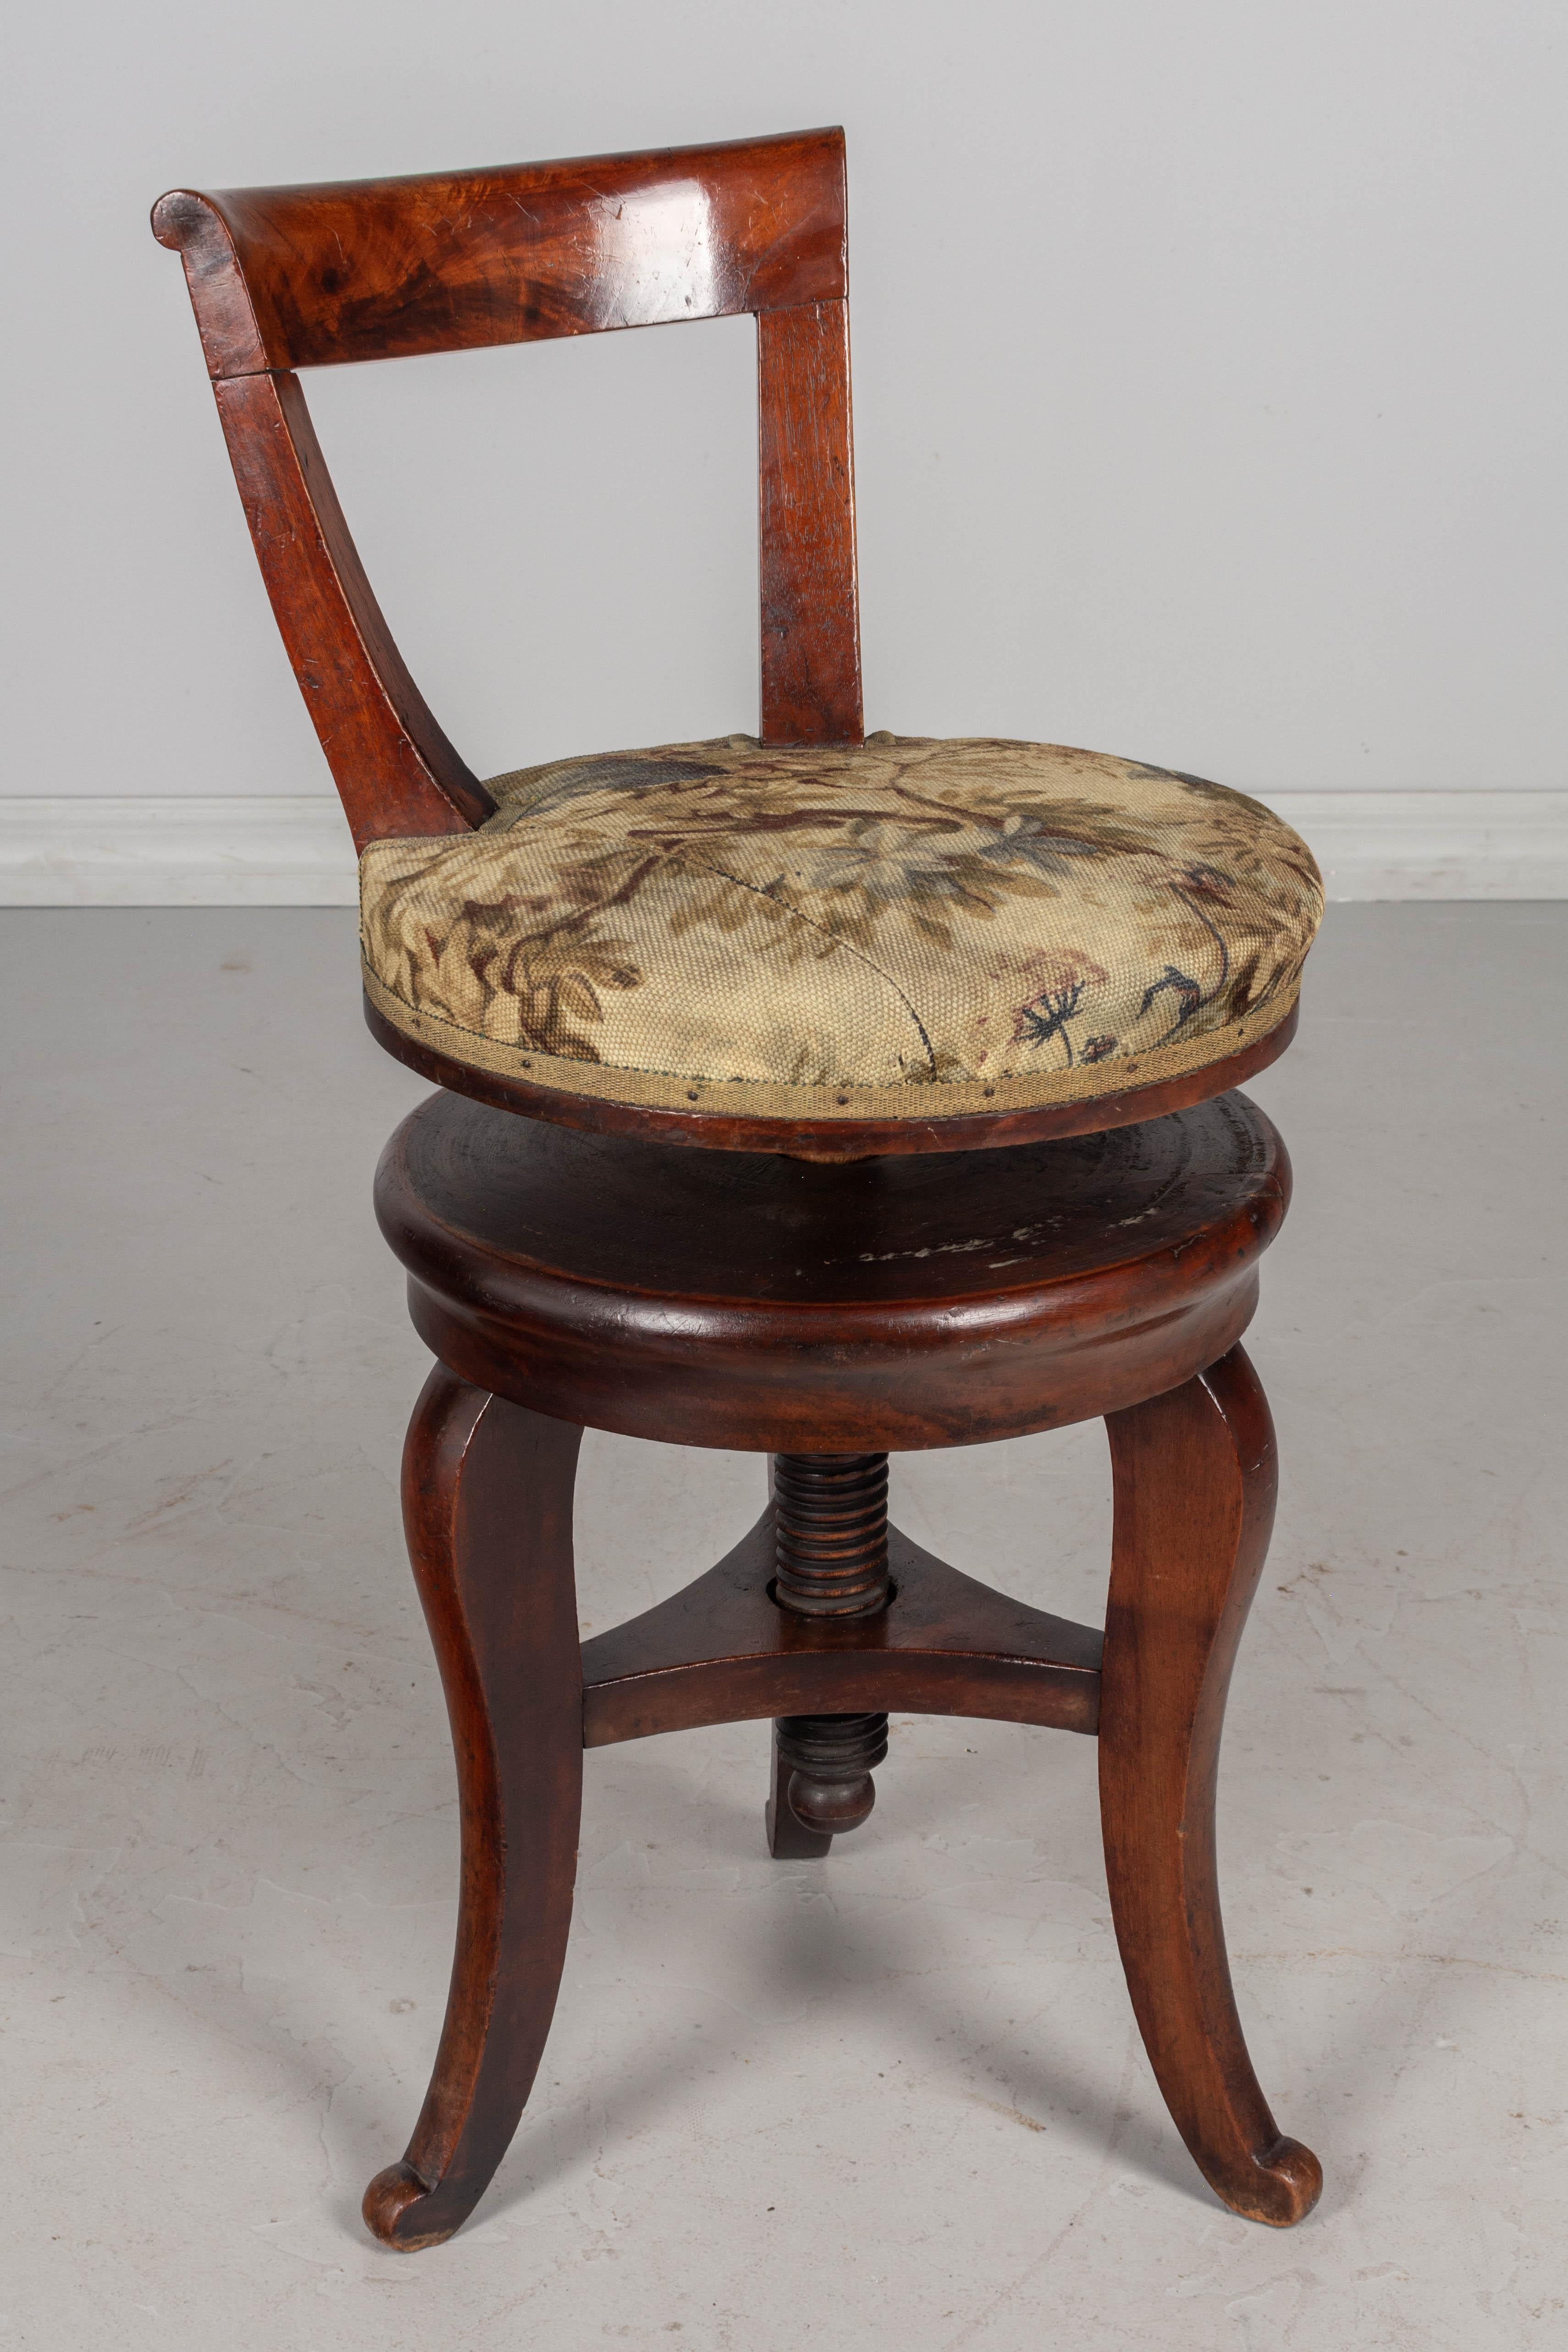 A 19th century French Restauration style circular three leg swivel stool made of solid mahogany with large turned wood center vice. This small chair was made for a harpist and the height may be easily adjusted for the comfort of the musician.